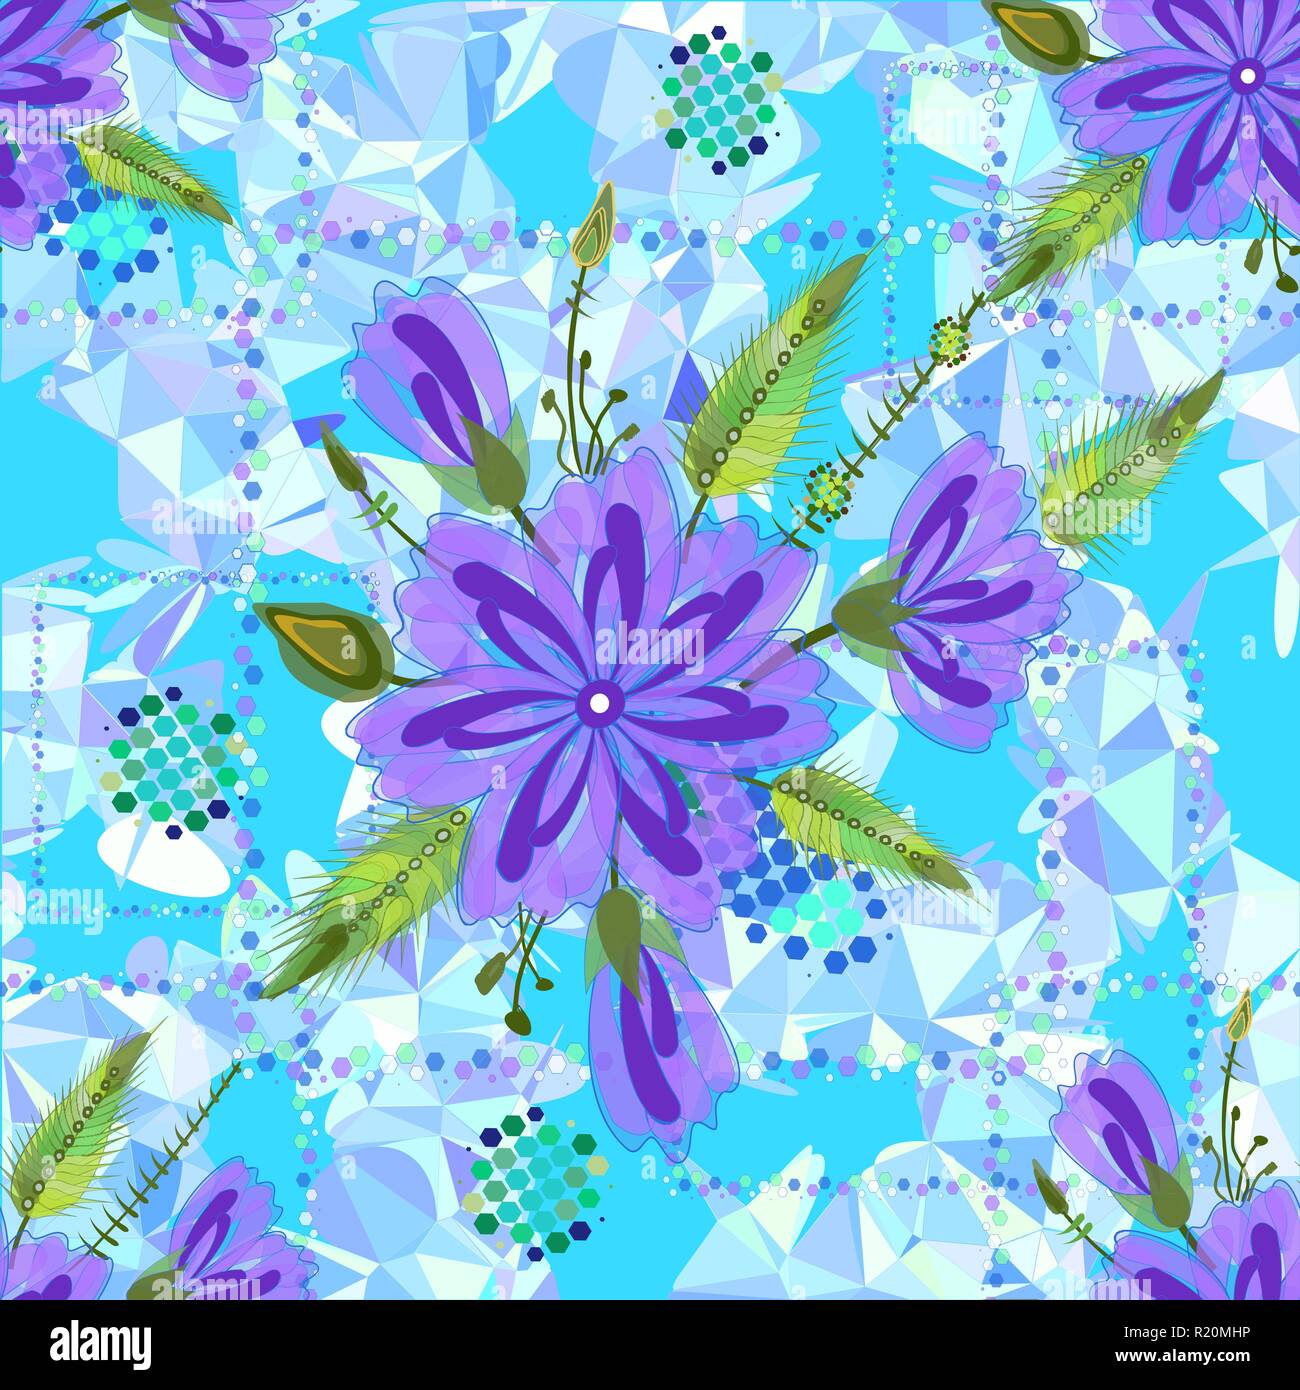 Amazing seamless floral pattern with bright colorful flowers and leaves on a blue background. The elegant the template for fashion prints. Stock Vector